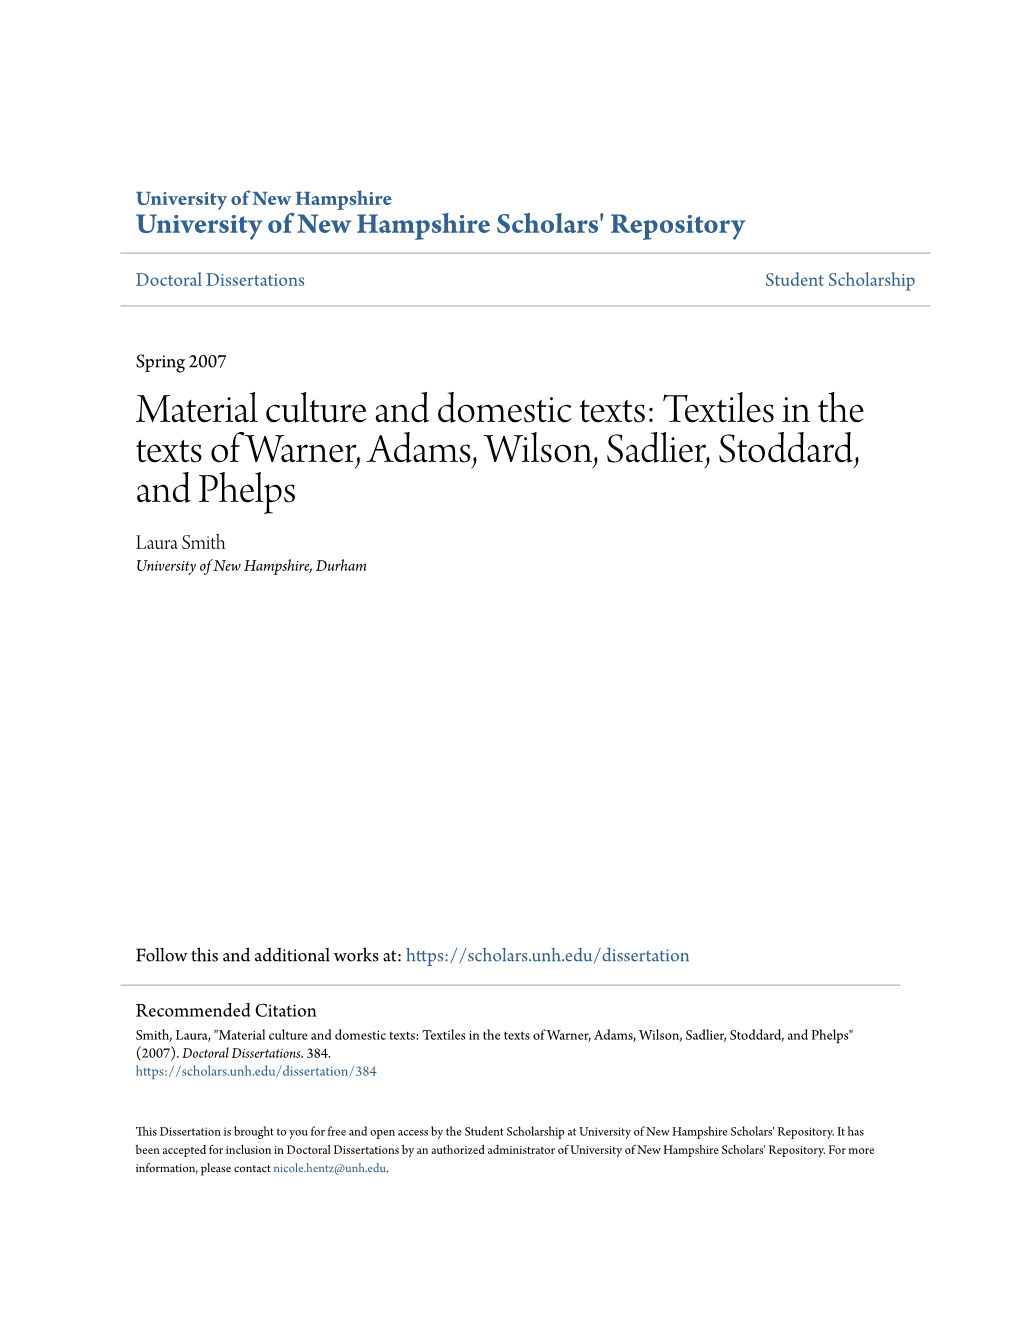 Material Culture and Domestic Texts: Textiles in the Texts of Warner, Adams, Wilson, Sadlier, Stoddard, and Phelps Laura Smith University of New Hampshire, Durham